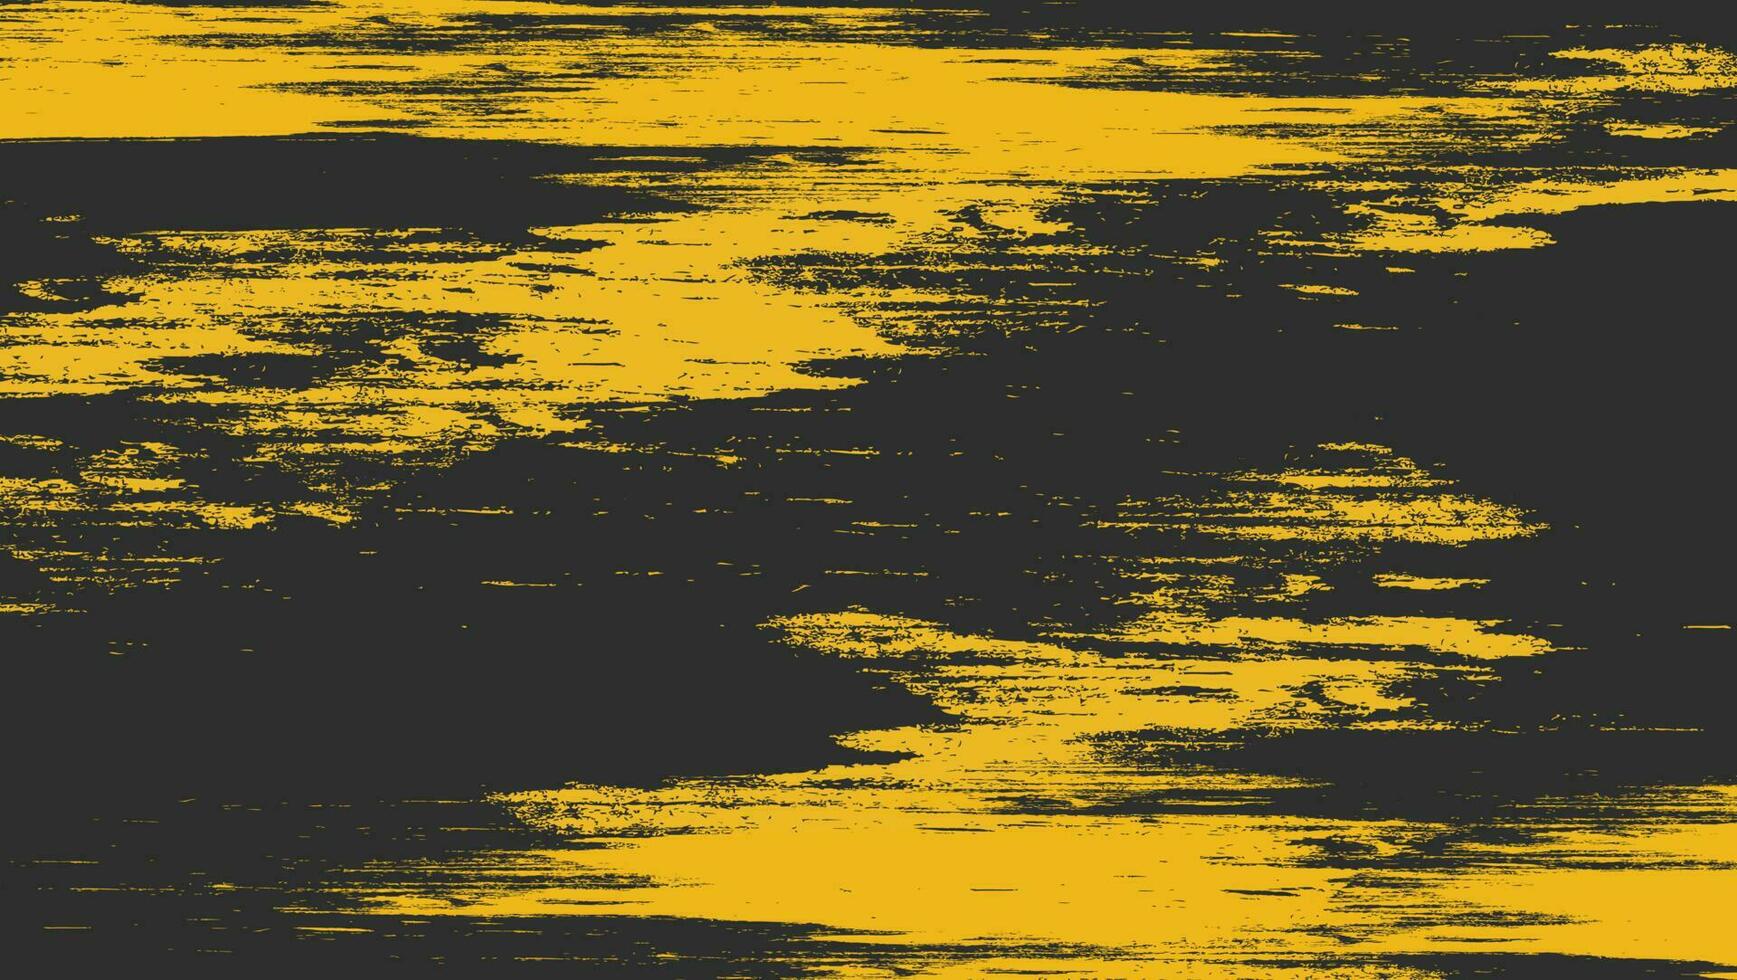 Abstract Yellow Scratch Grunge Texture Design In Black Background vector